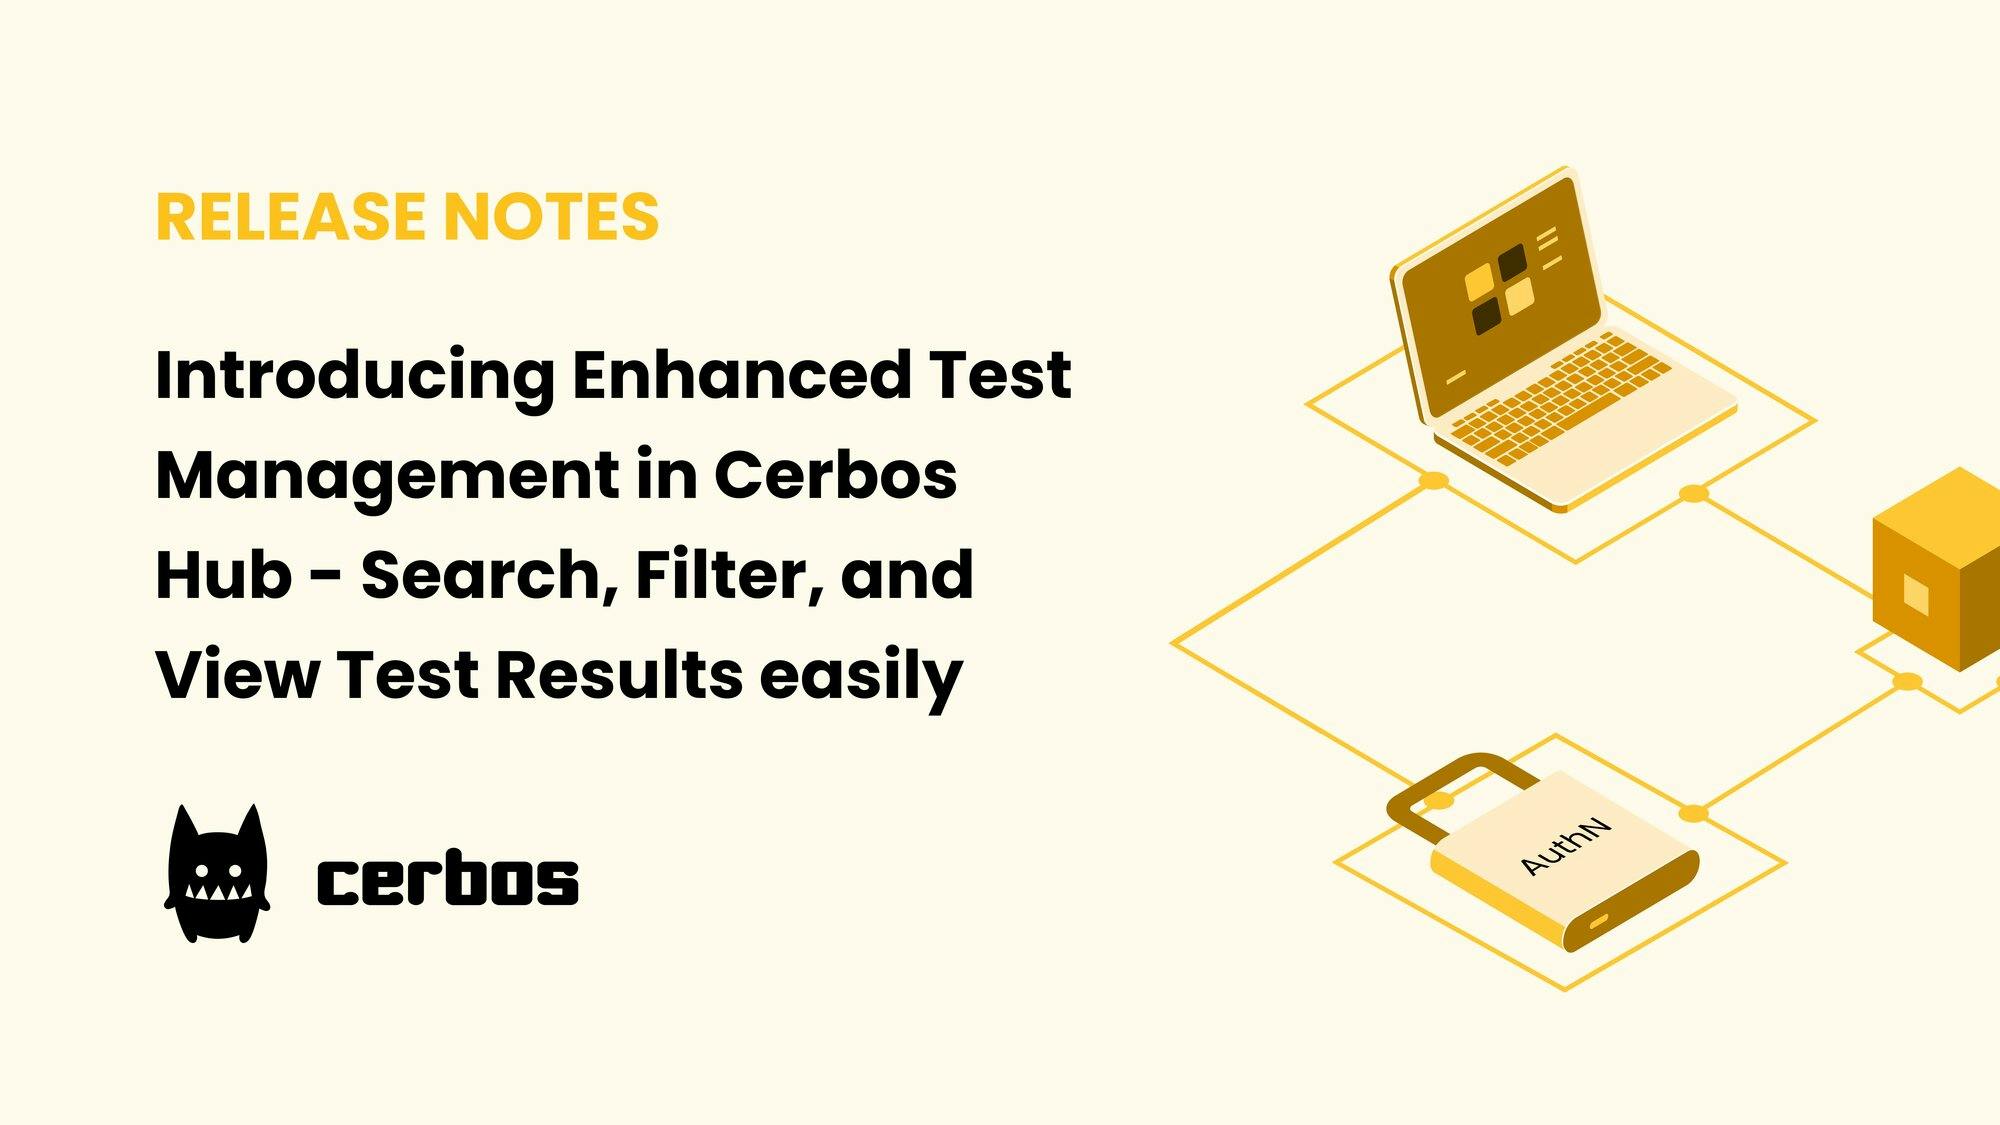 Introducing enhanced test management in Cerbos Hub - Search, filter, and view test results easily